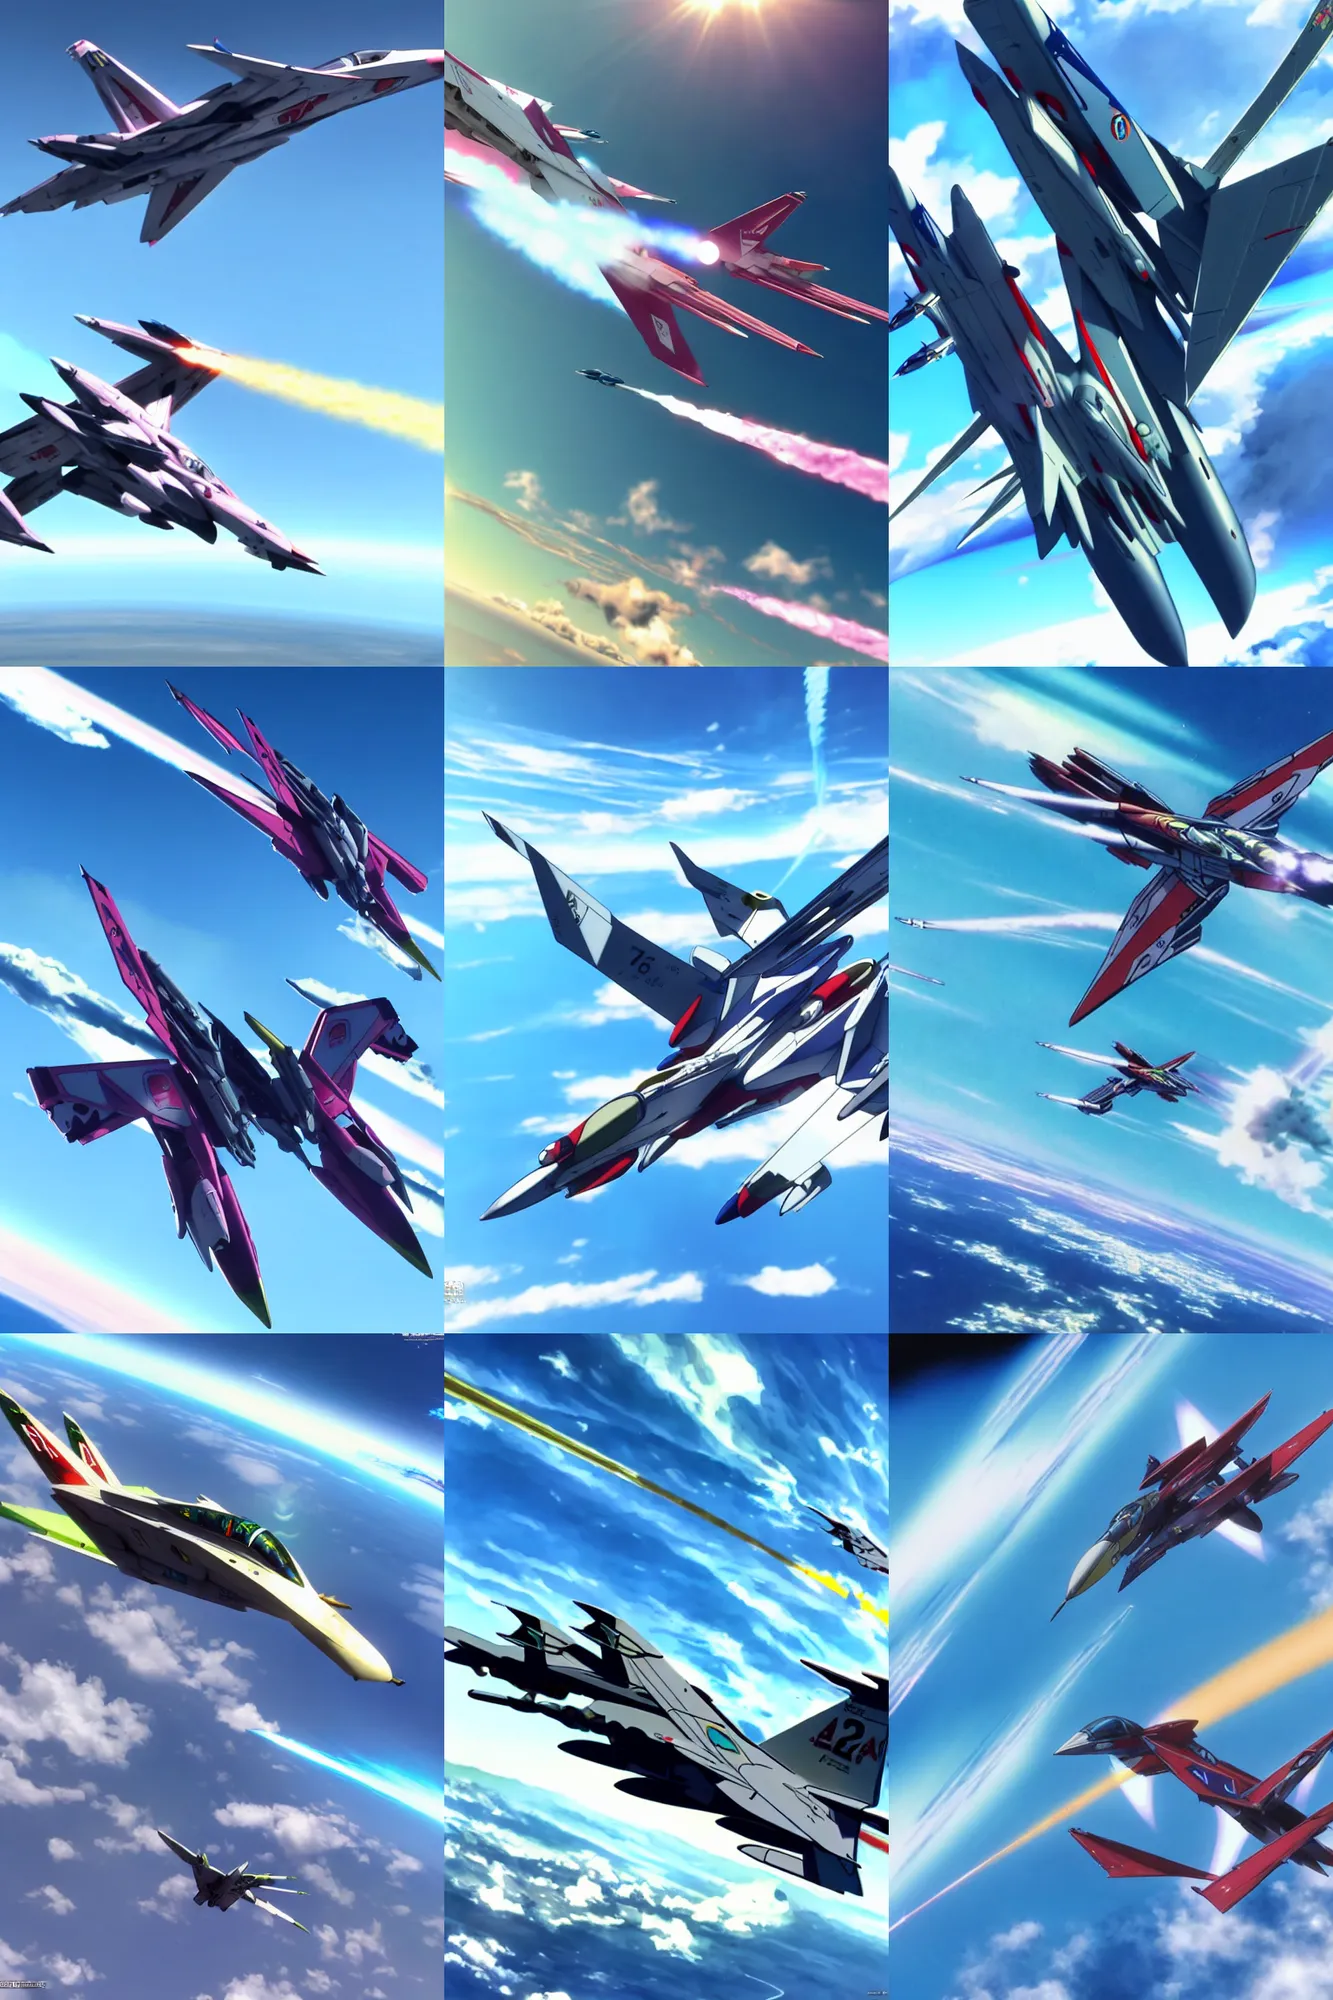 Prompt: An awe inspiring flight shot of a VF25 Messiah in Jet Mode from Macross Frontier soaring through the air on a sunny day with a clear blue sky, anime, Macross Franchise, Macross Frontier, Valkyrie Fighter Jet, sci-fi anime, 3D CGI, mecha anime, no robot